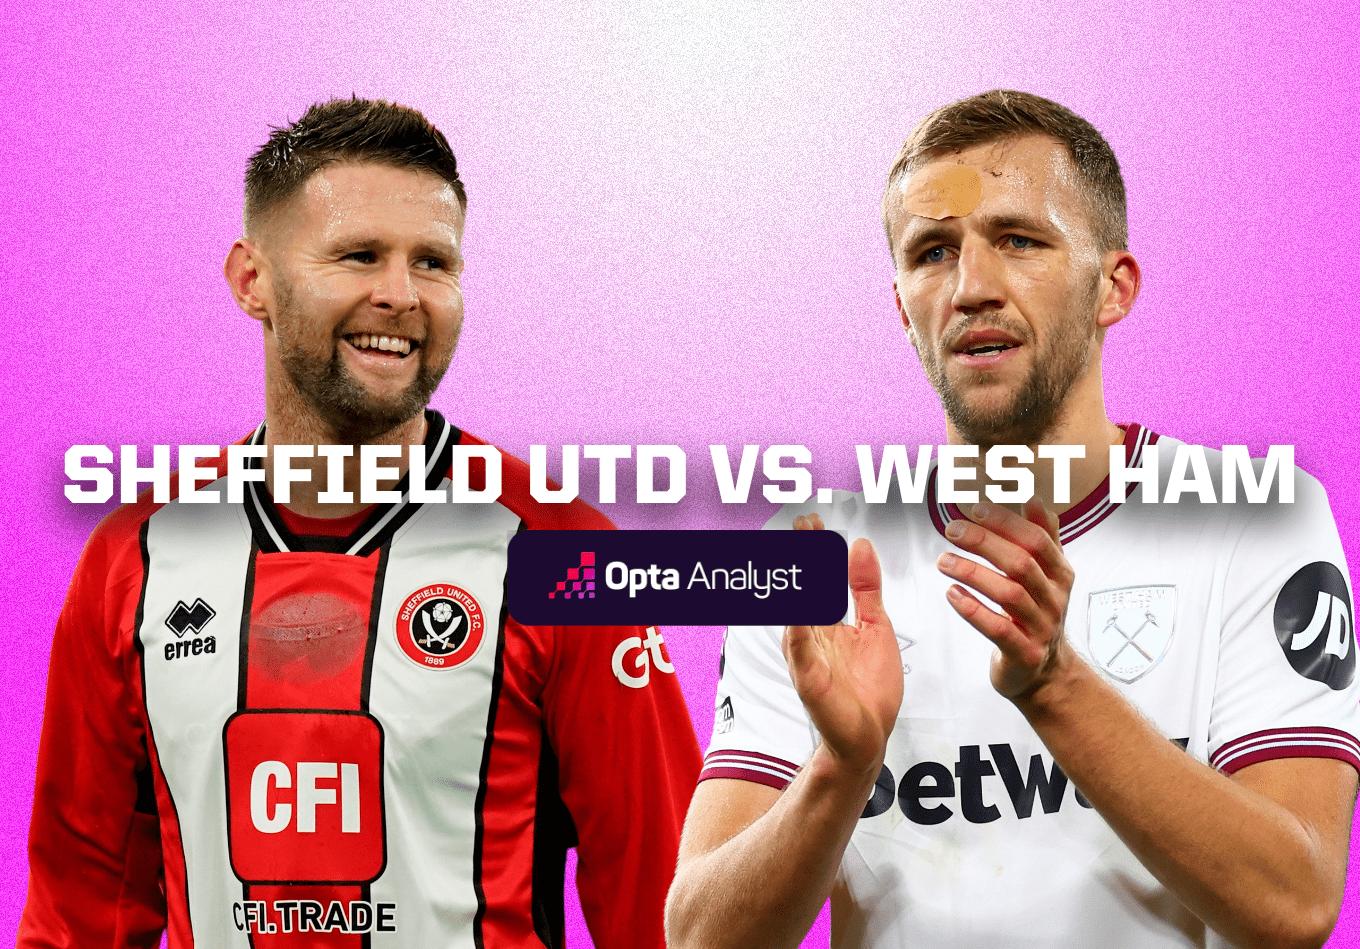 Sheffield United vs West Ham: Prediction and Preview